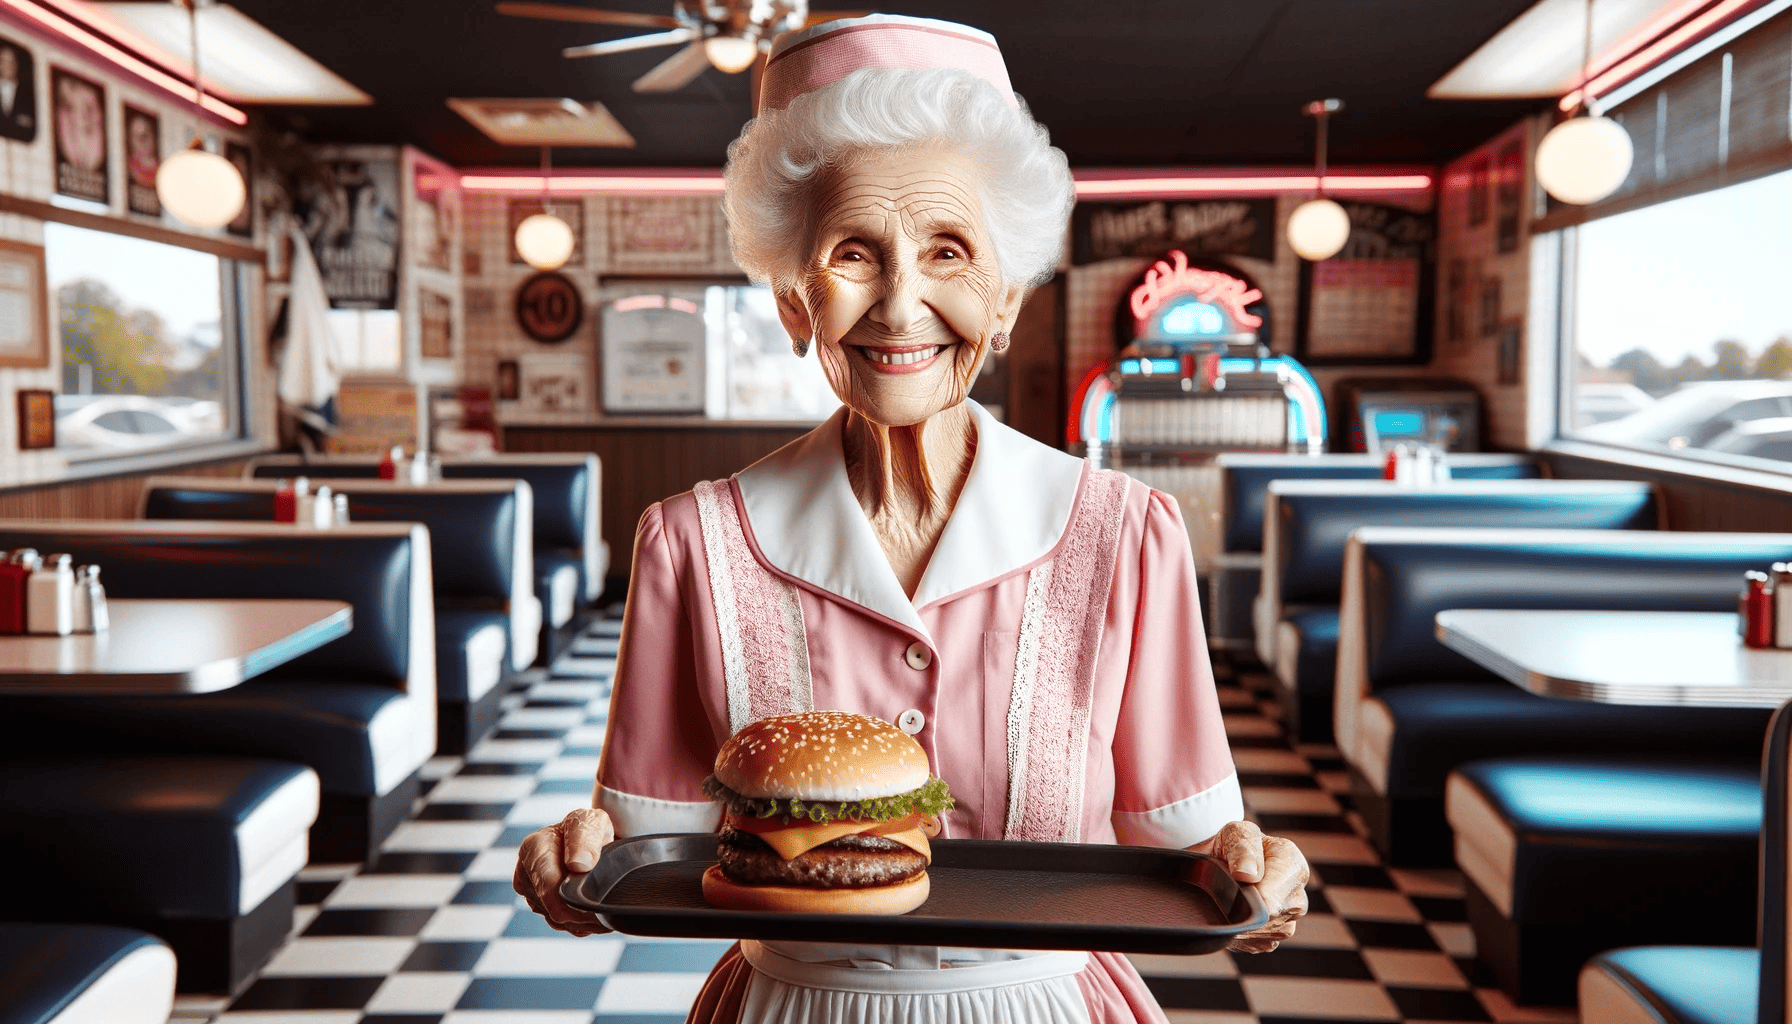 DALL·E-2024-01-23-11.28.45-A-100-year-old-woman-working-as-a-waitress-in-an-American-diner-with-a-burger-on-her-serving-tray.-She-is-dressed-in-a-retro-style-uniform-typical-of